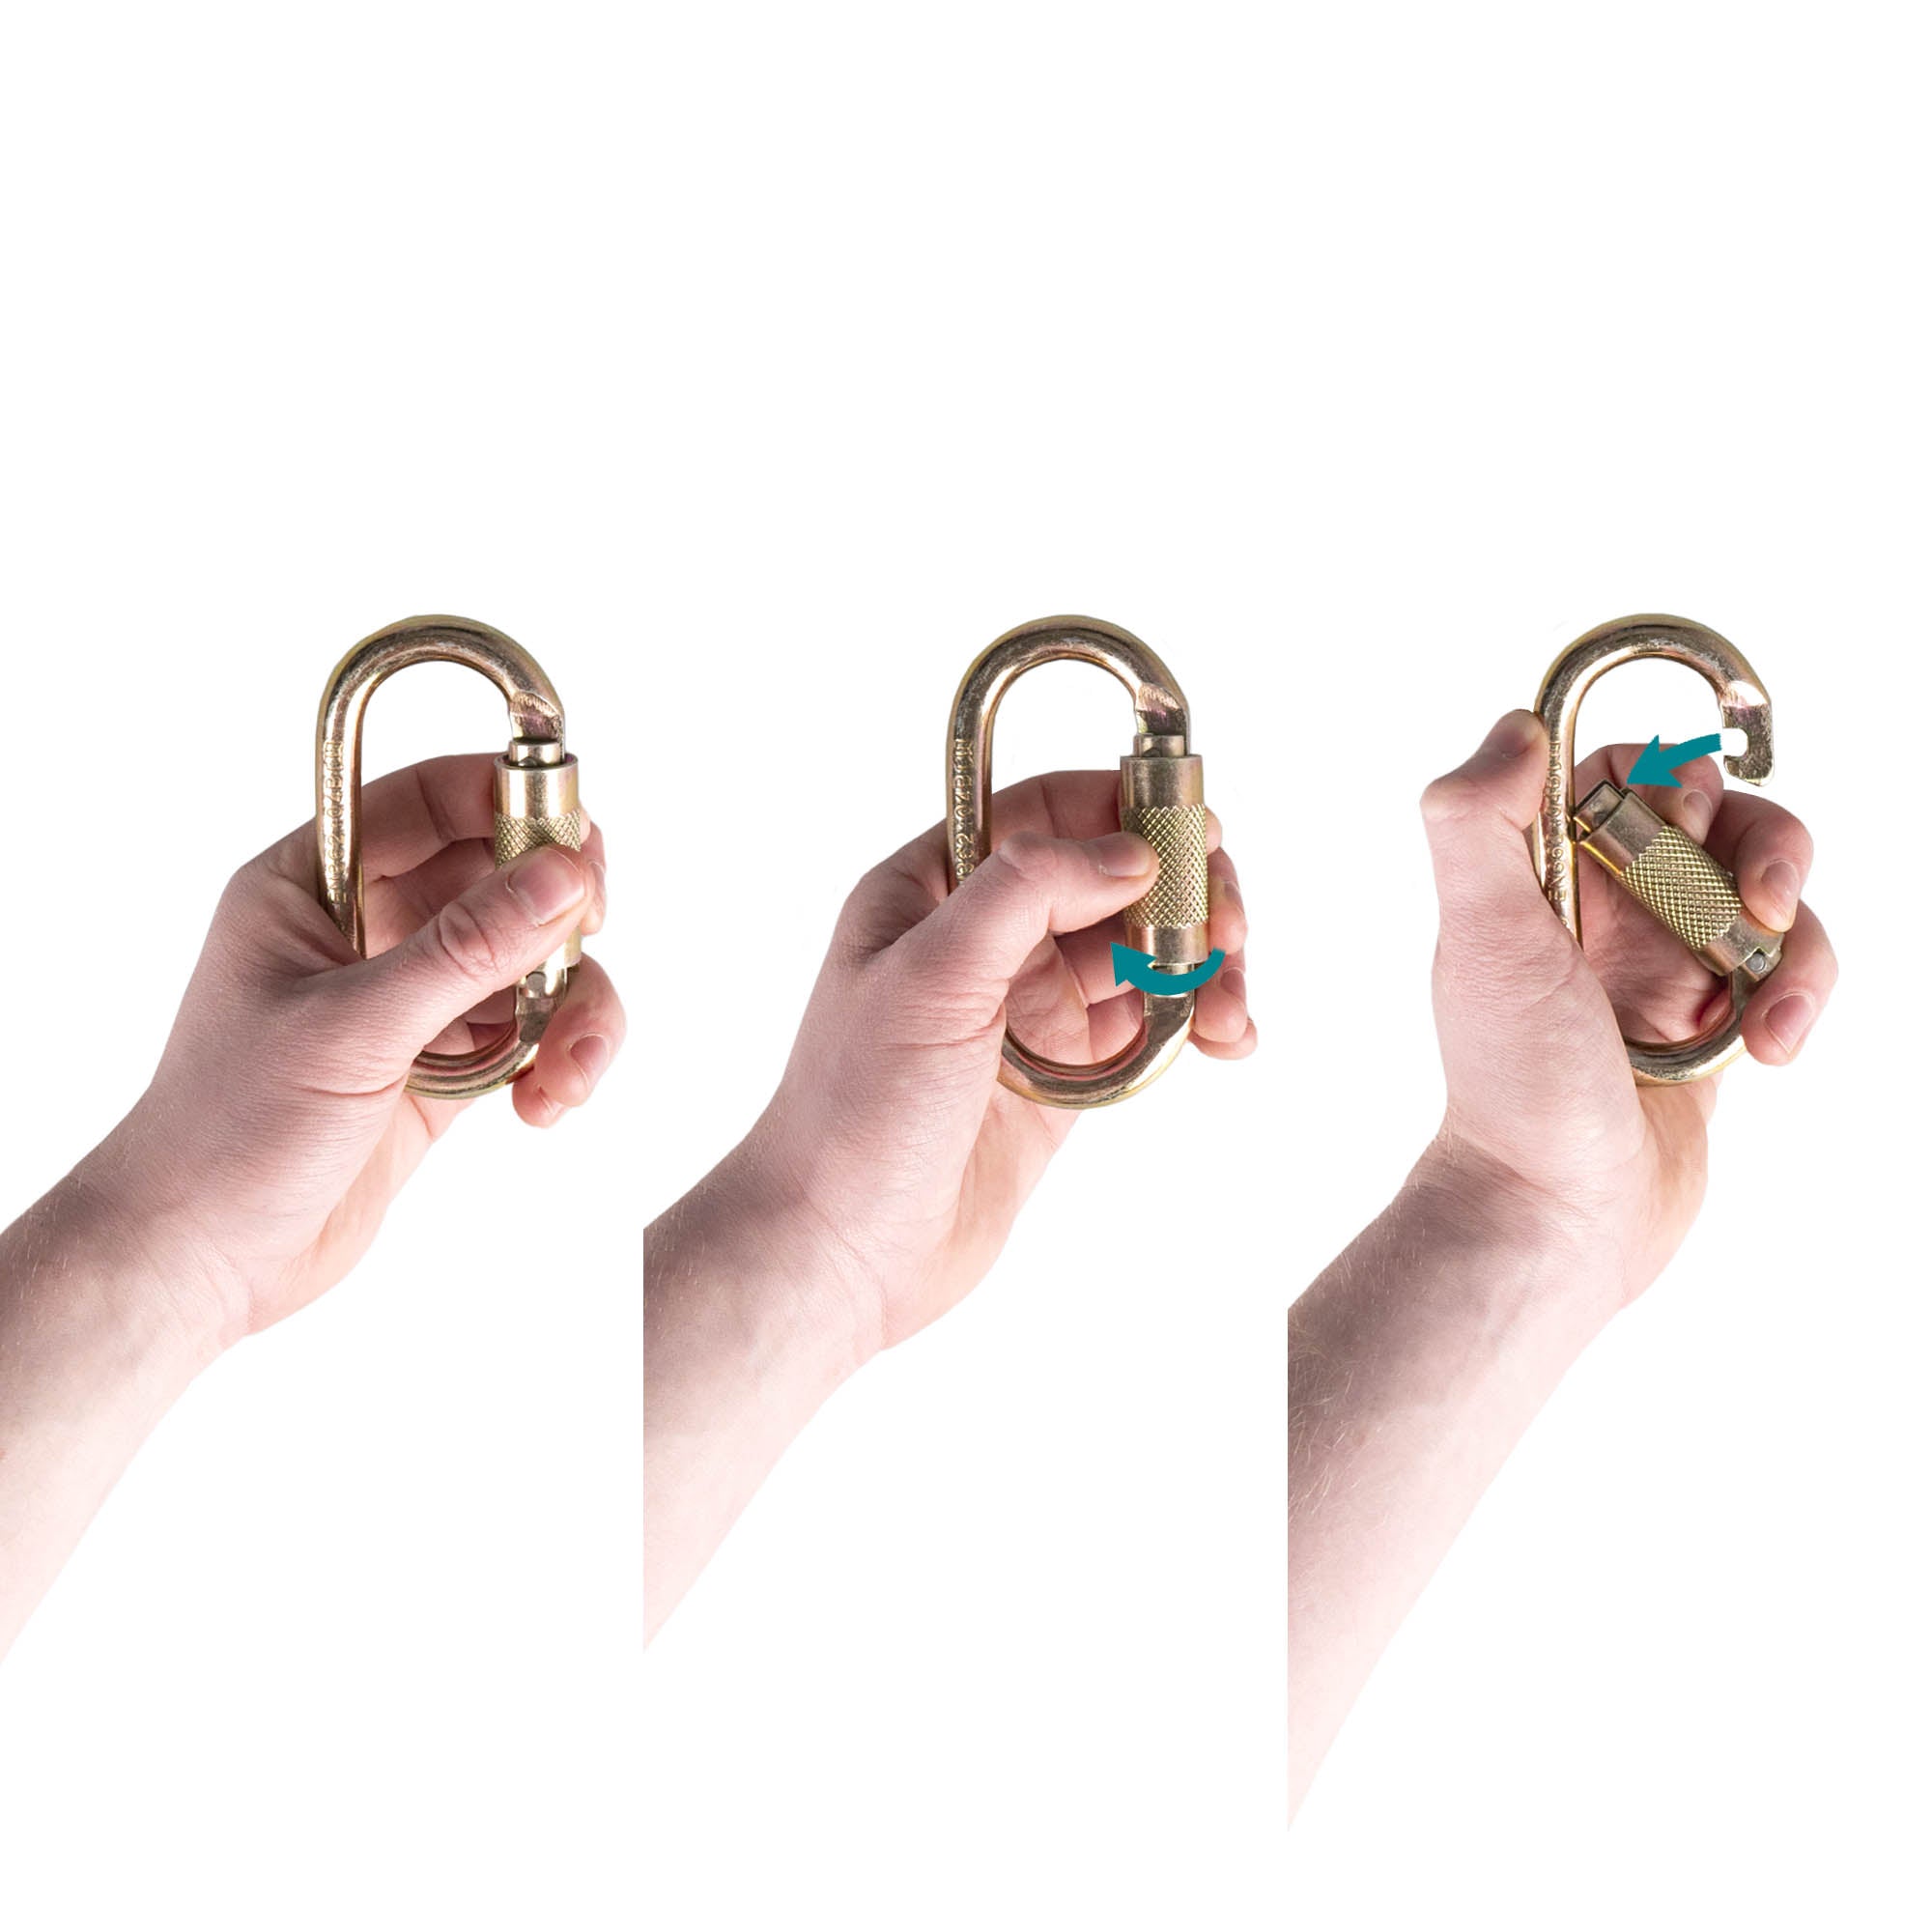 Prodigy carabiner double action sequence shot